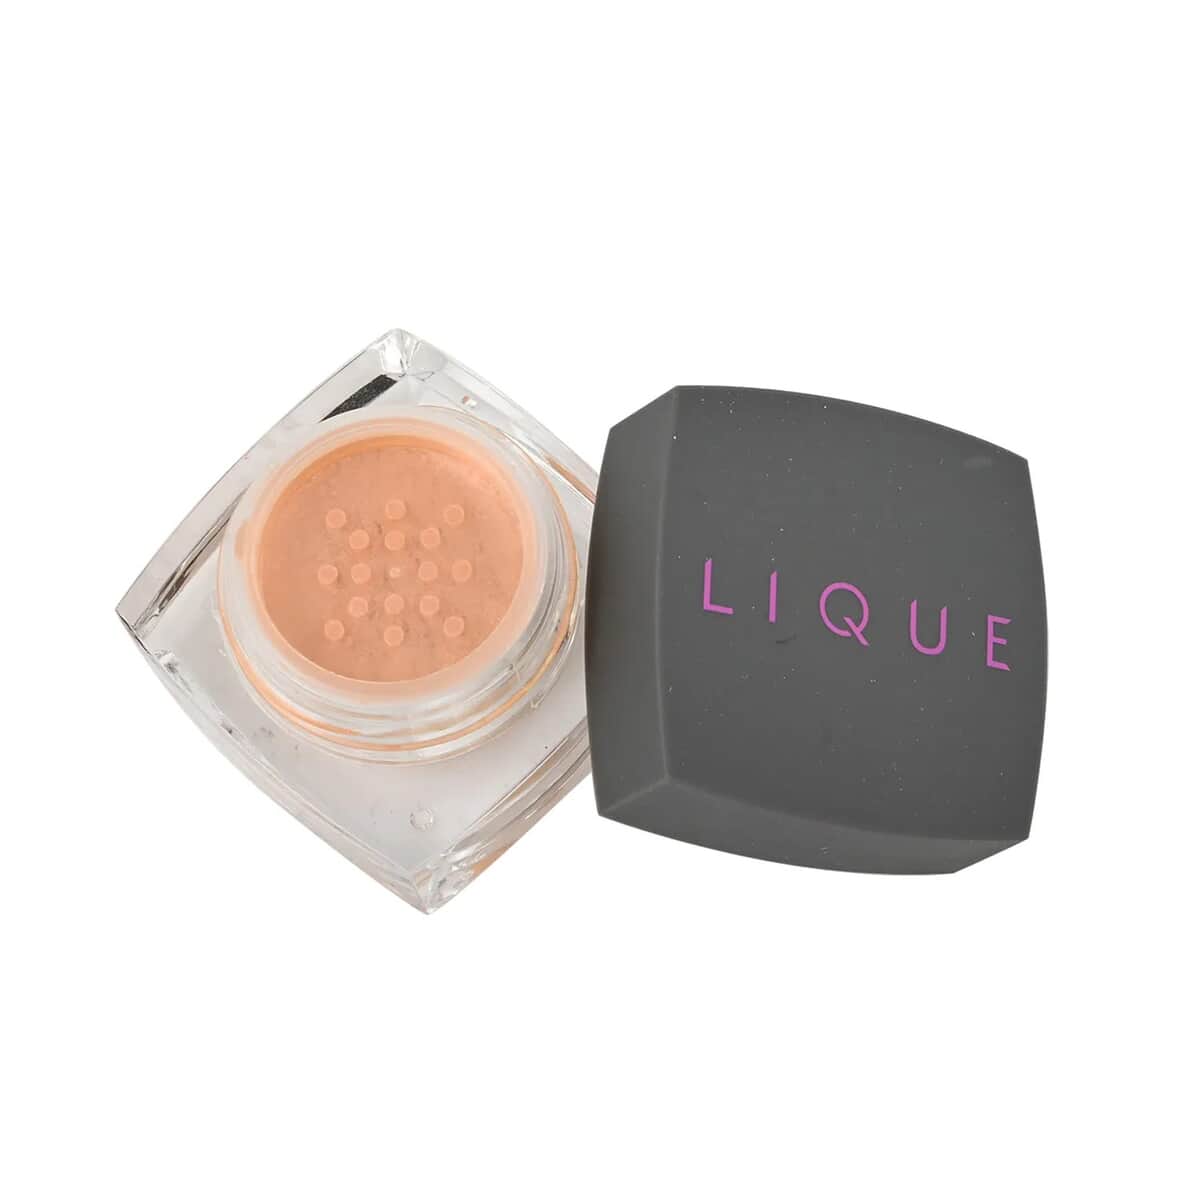 Deal of the Day Closeout Lique Set of 2 Lipstick & Powder Set (But 1 Get 1 Free) image number 5